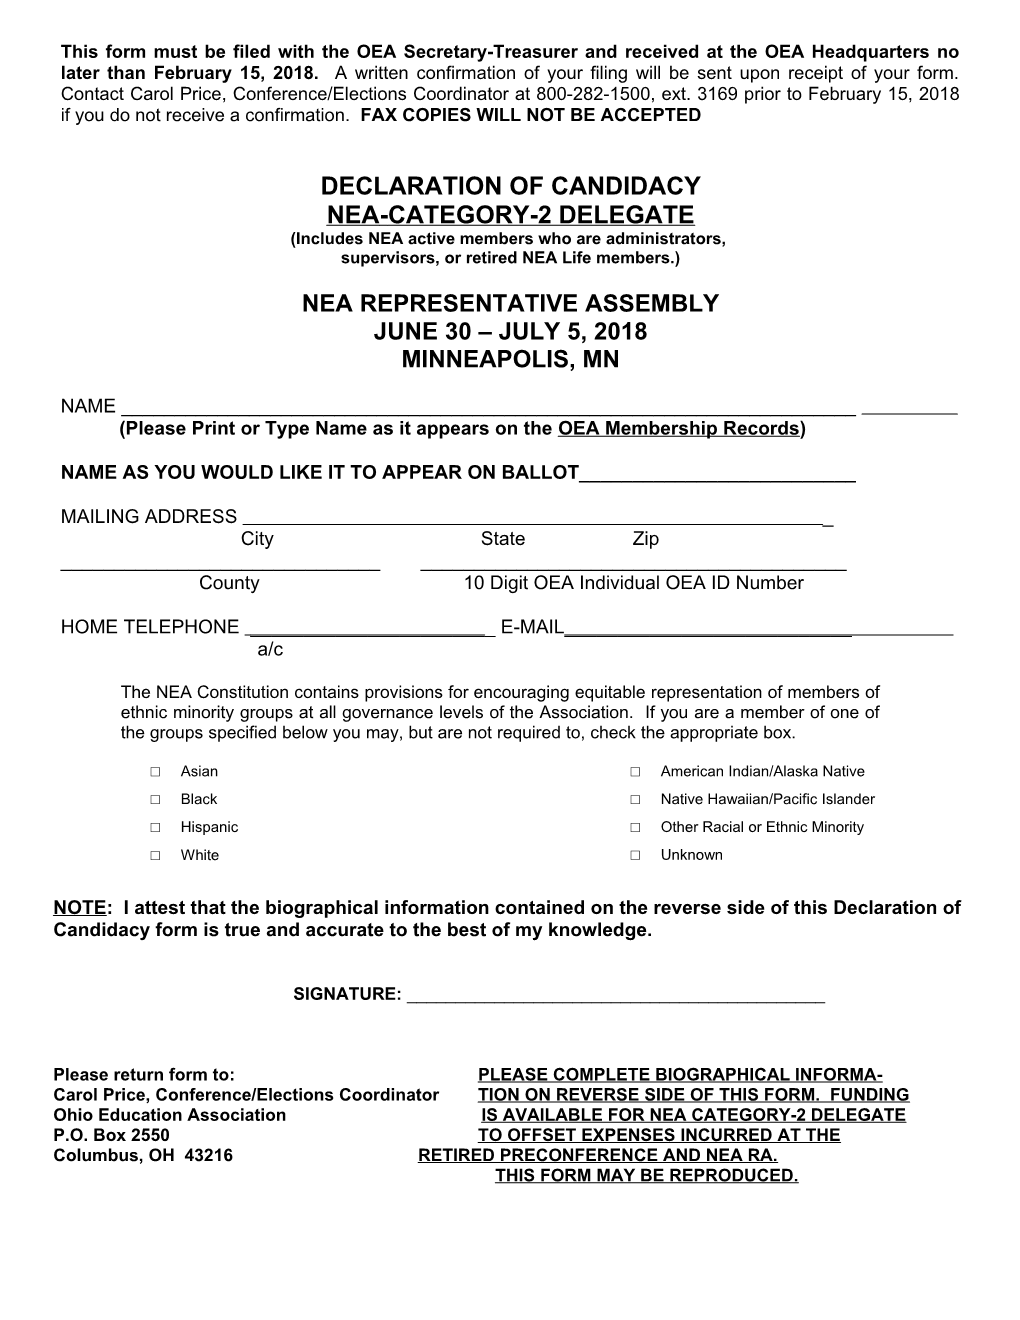 This Form Must Be Filed with the OEA Secretary-Treasurer by ______ 15, 2000